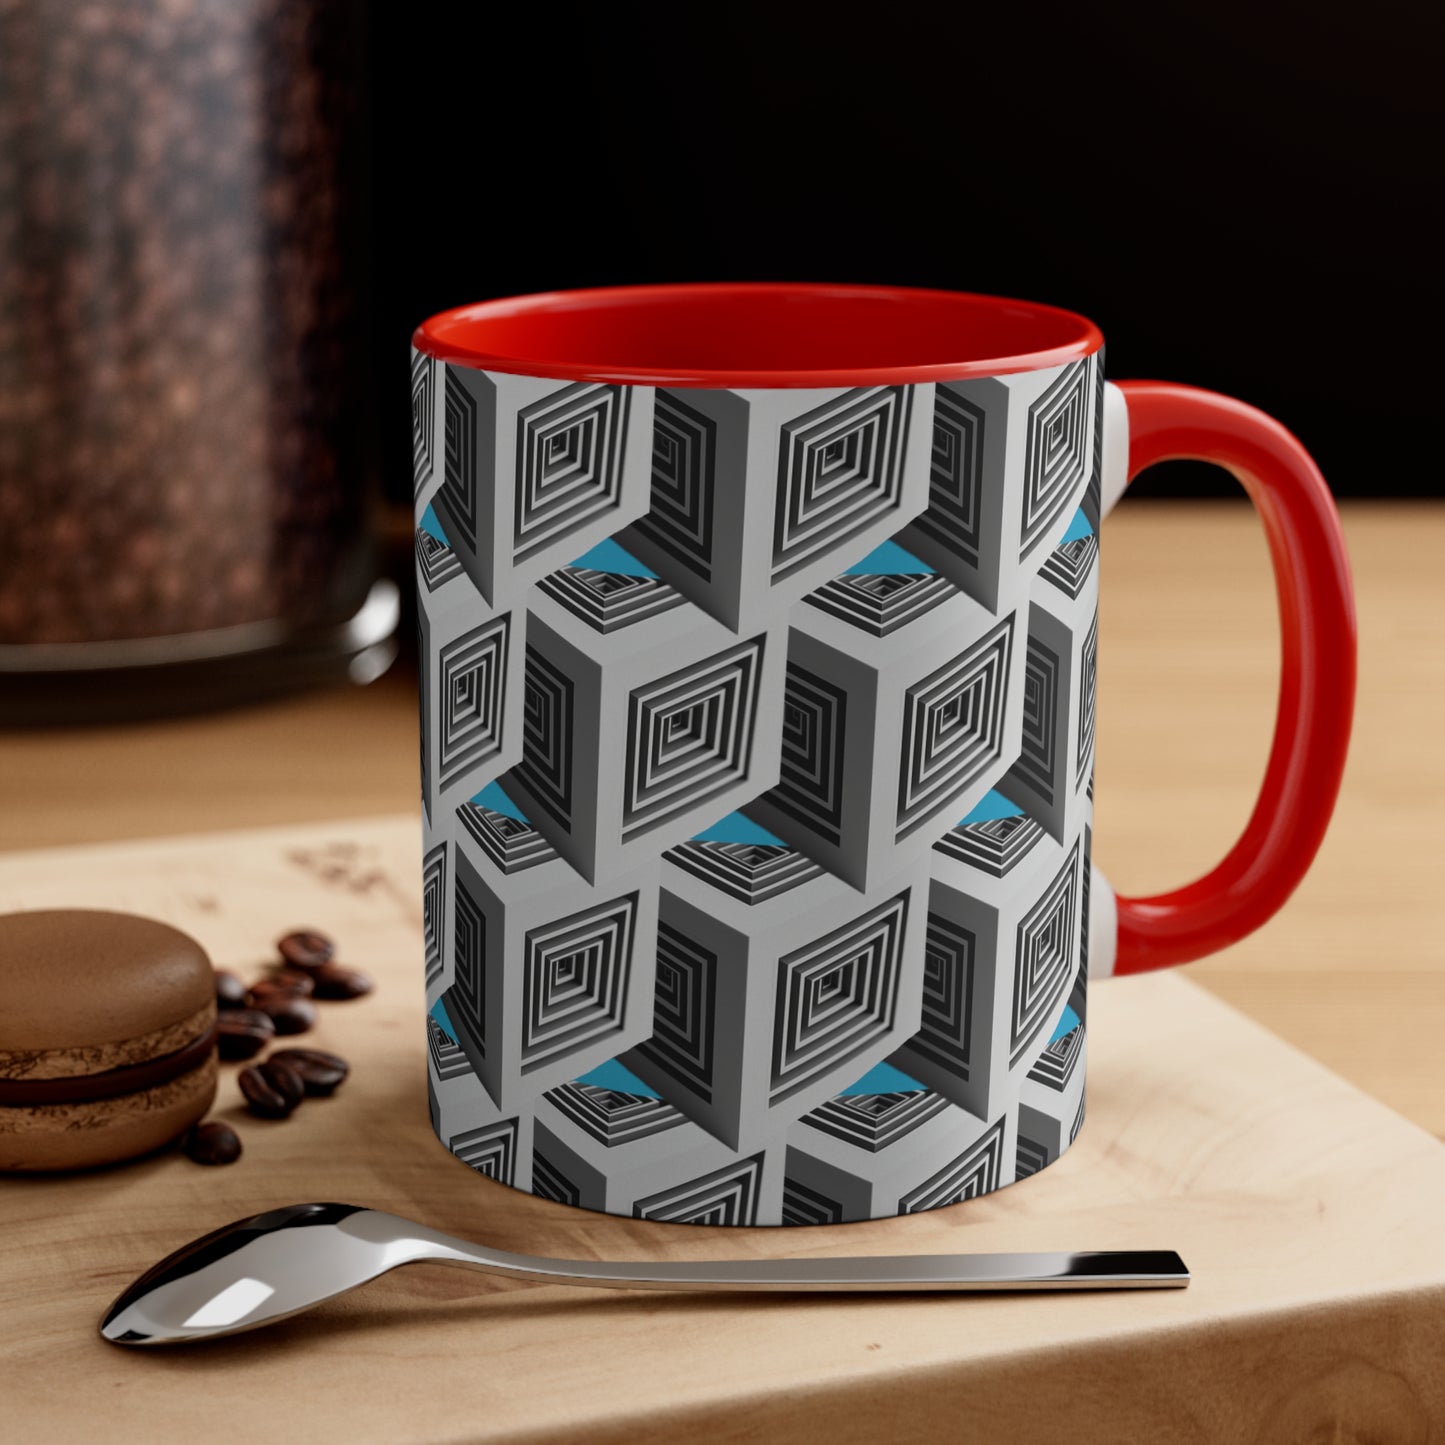 Geometric Cubes with Turquoise